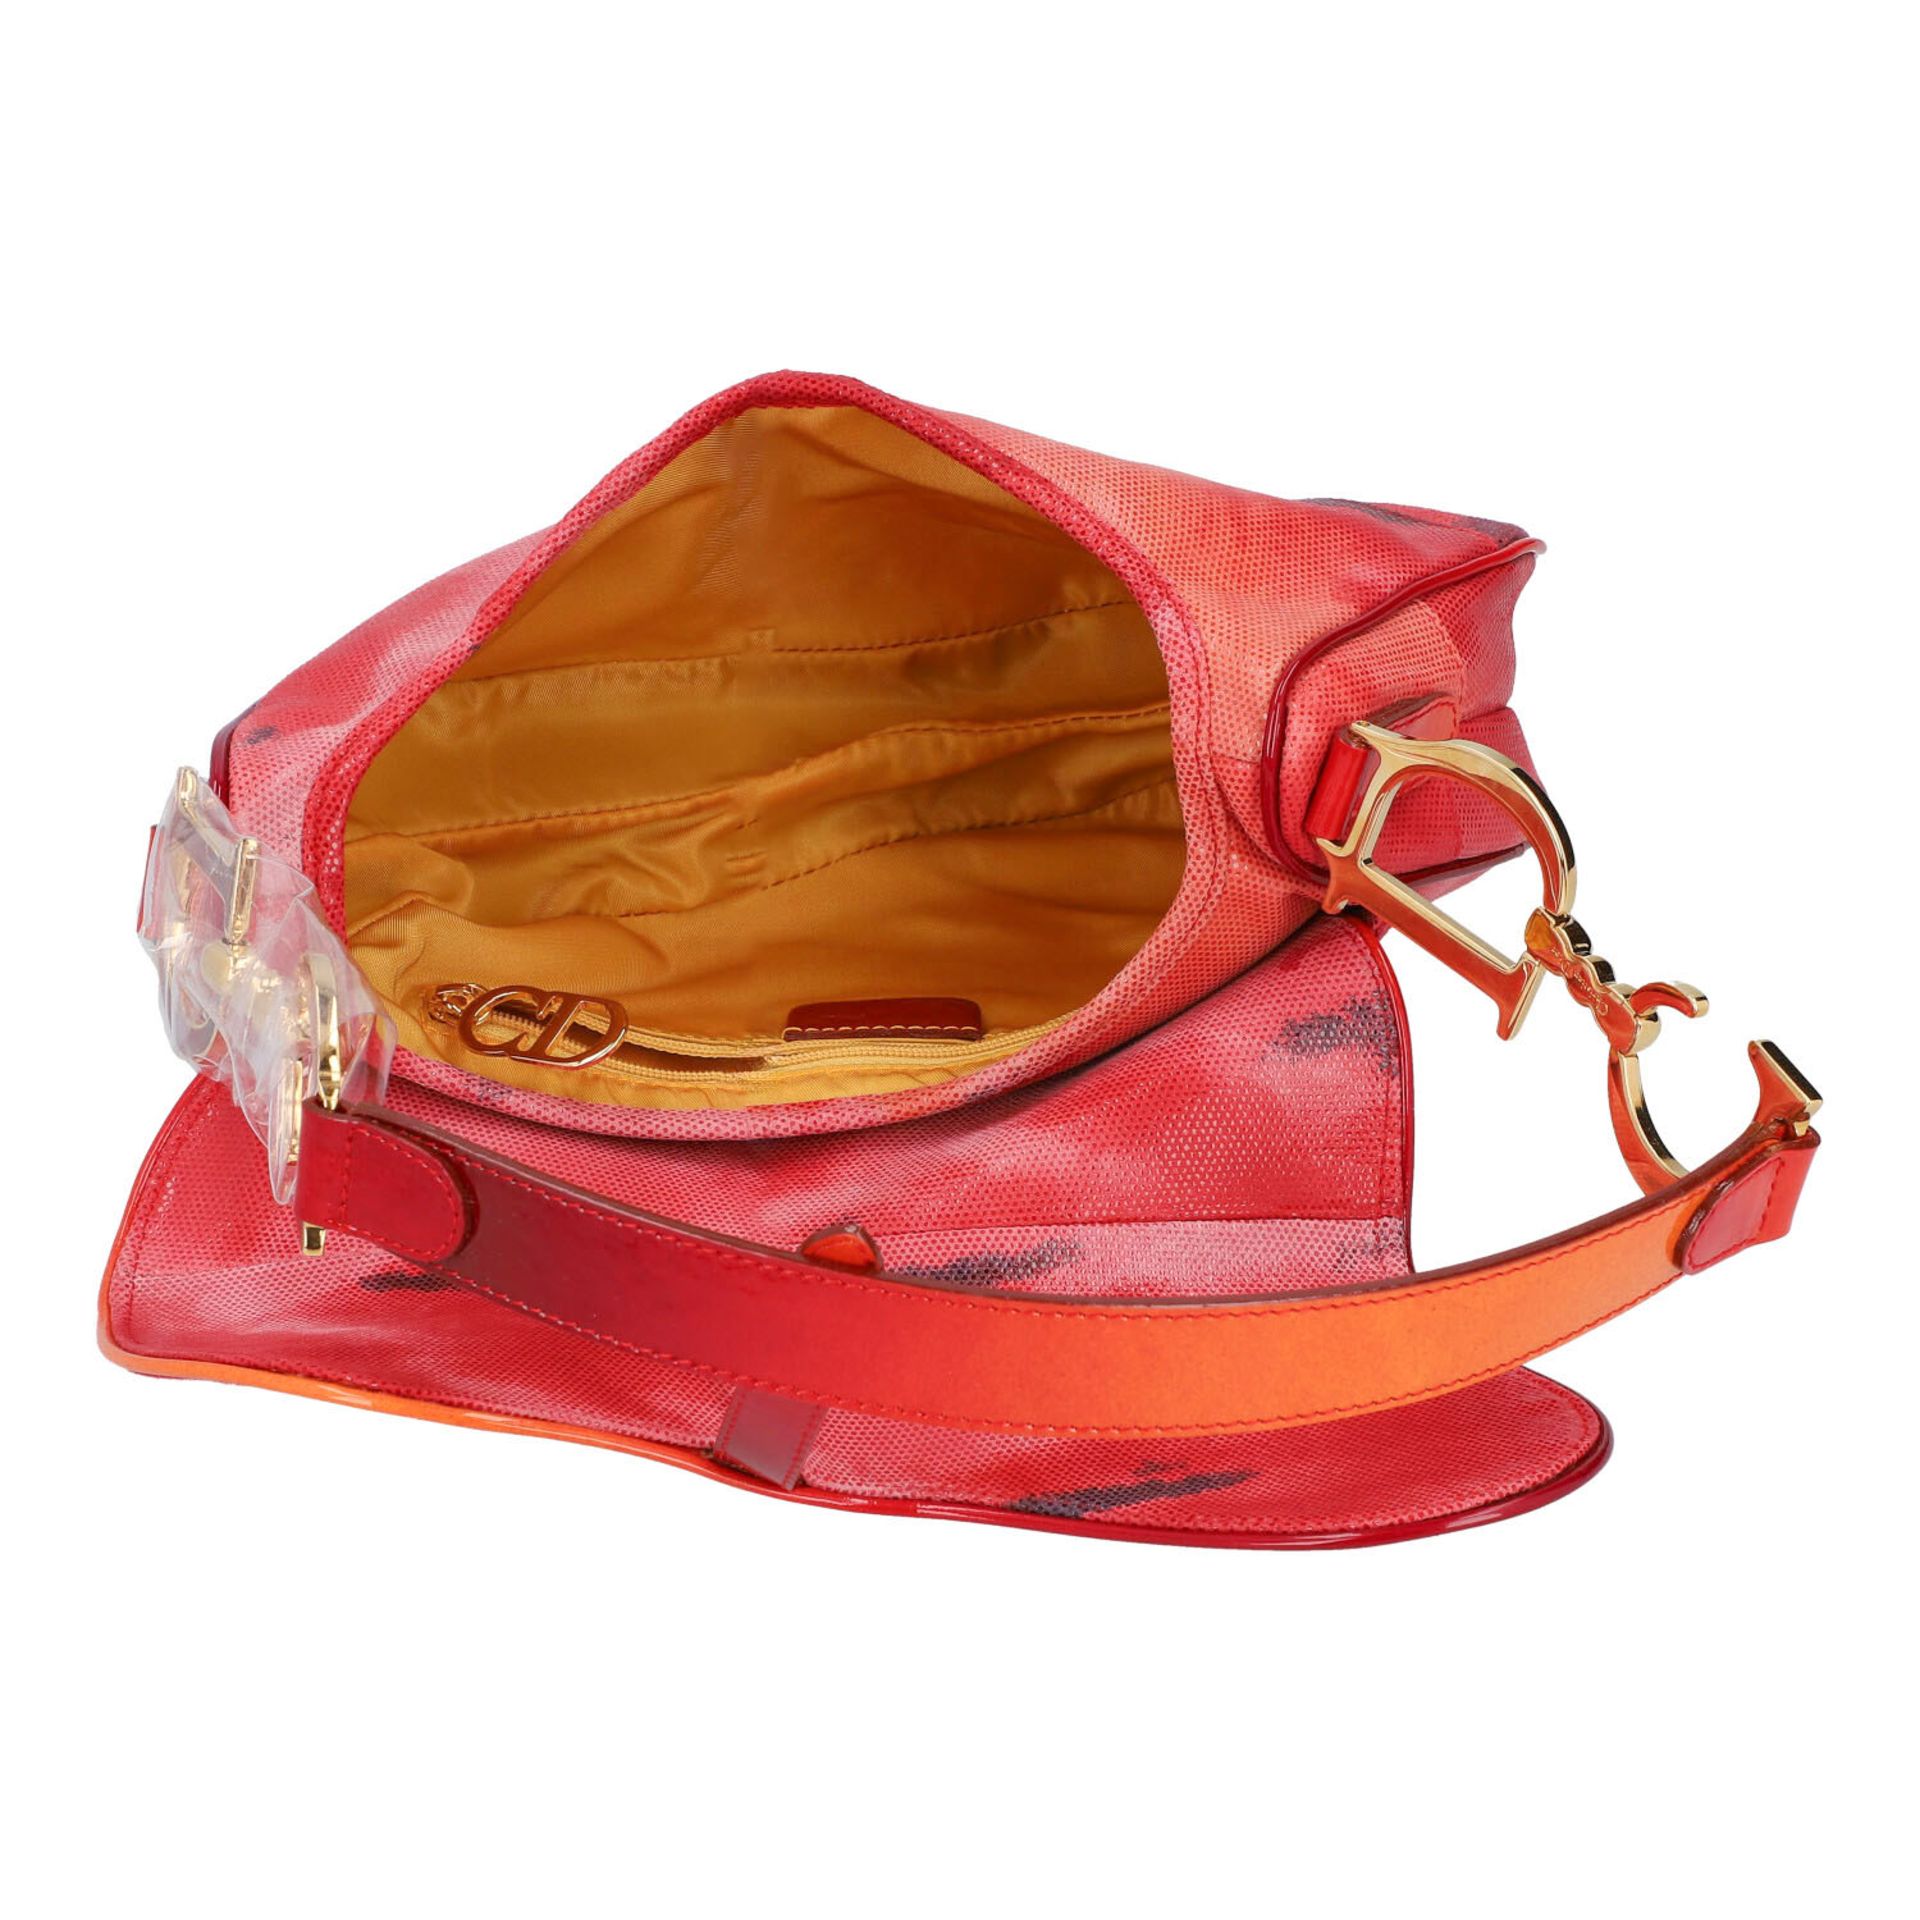 DIOR Schultertasche "SADDLE BAG", Koll.: 2001. - Image 6 of 7